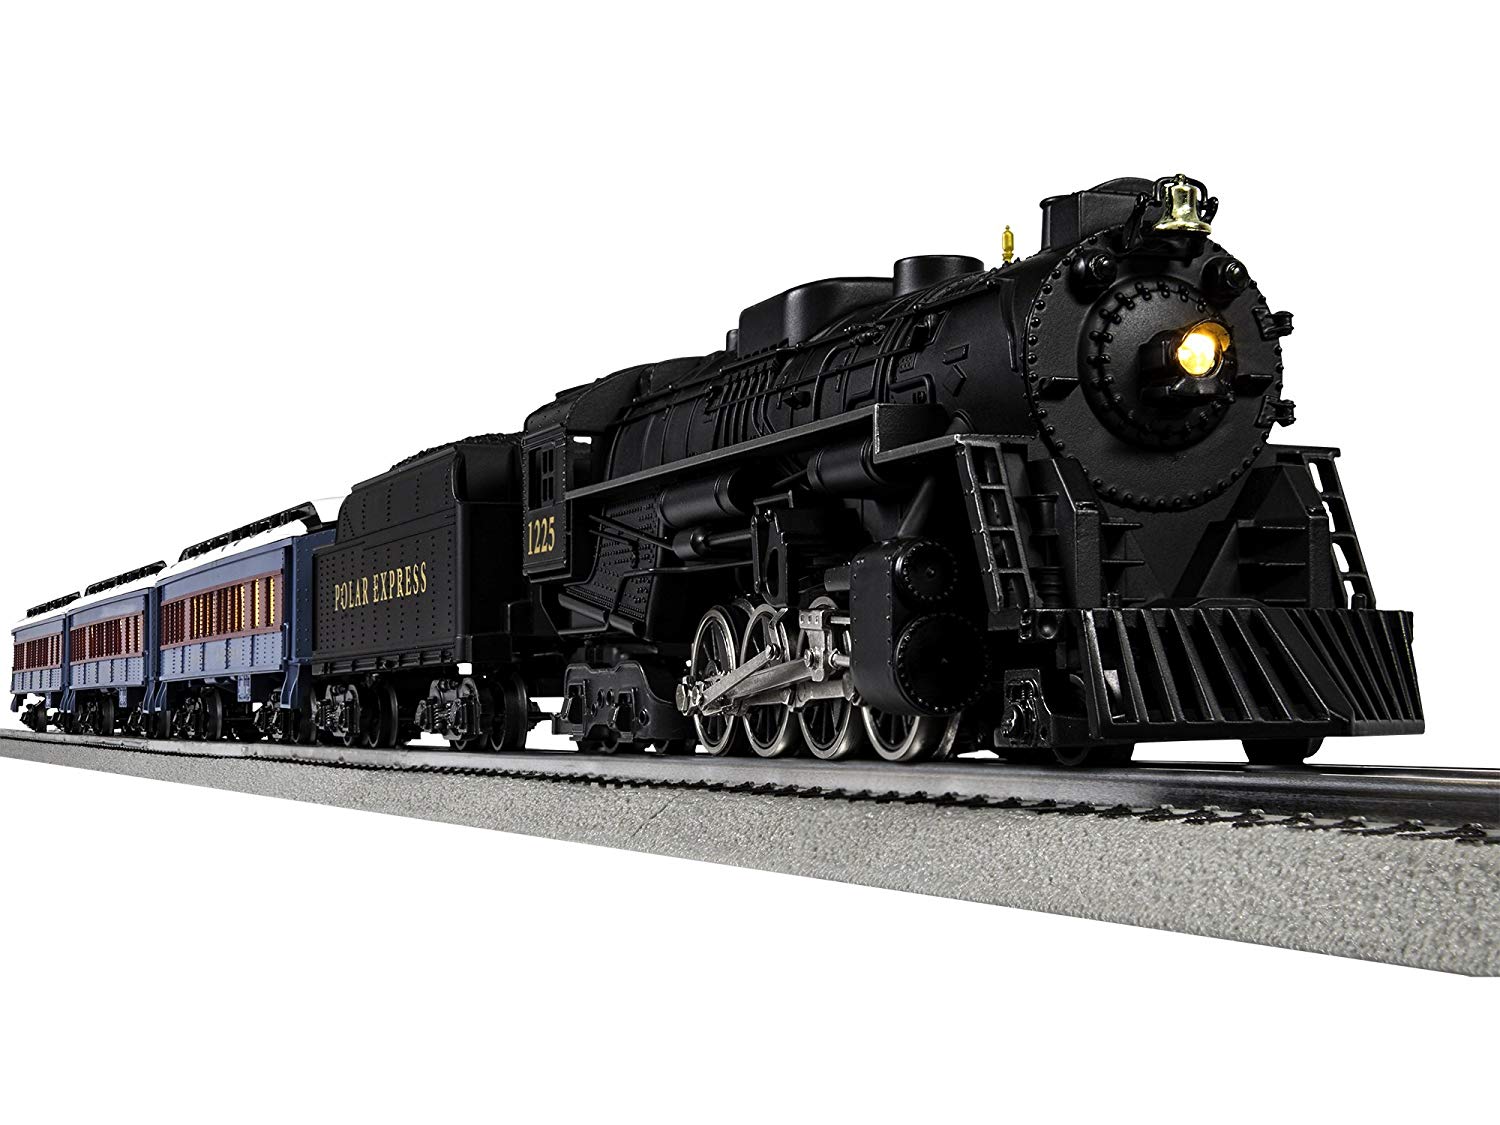 13-best-christmas-train-sets-buyer-s-guide-2021-heavy